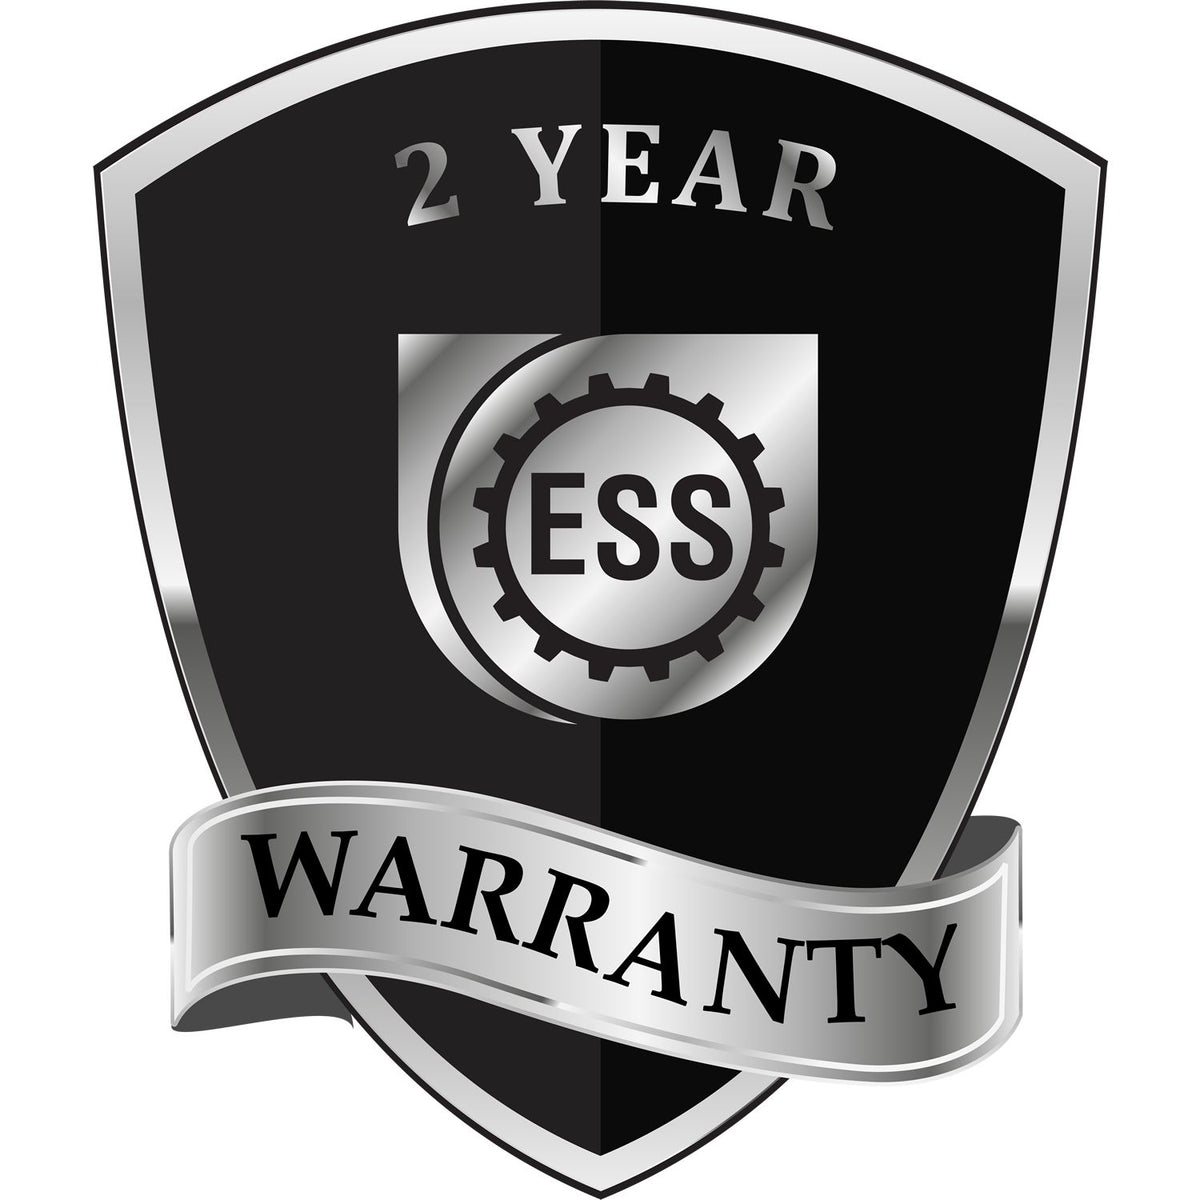 A black and silver badge or emblem showing warranty information for the Gift Delaware Architect Seal